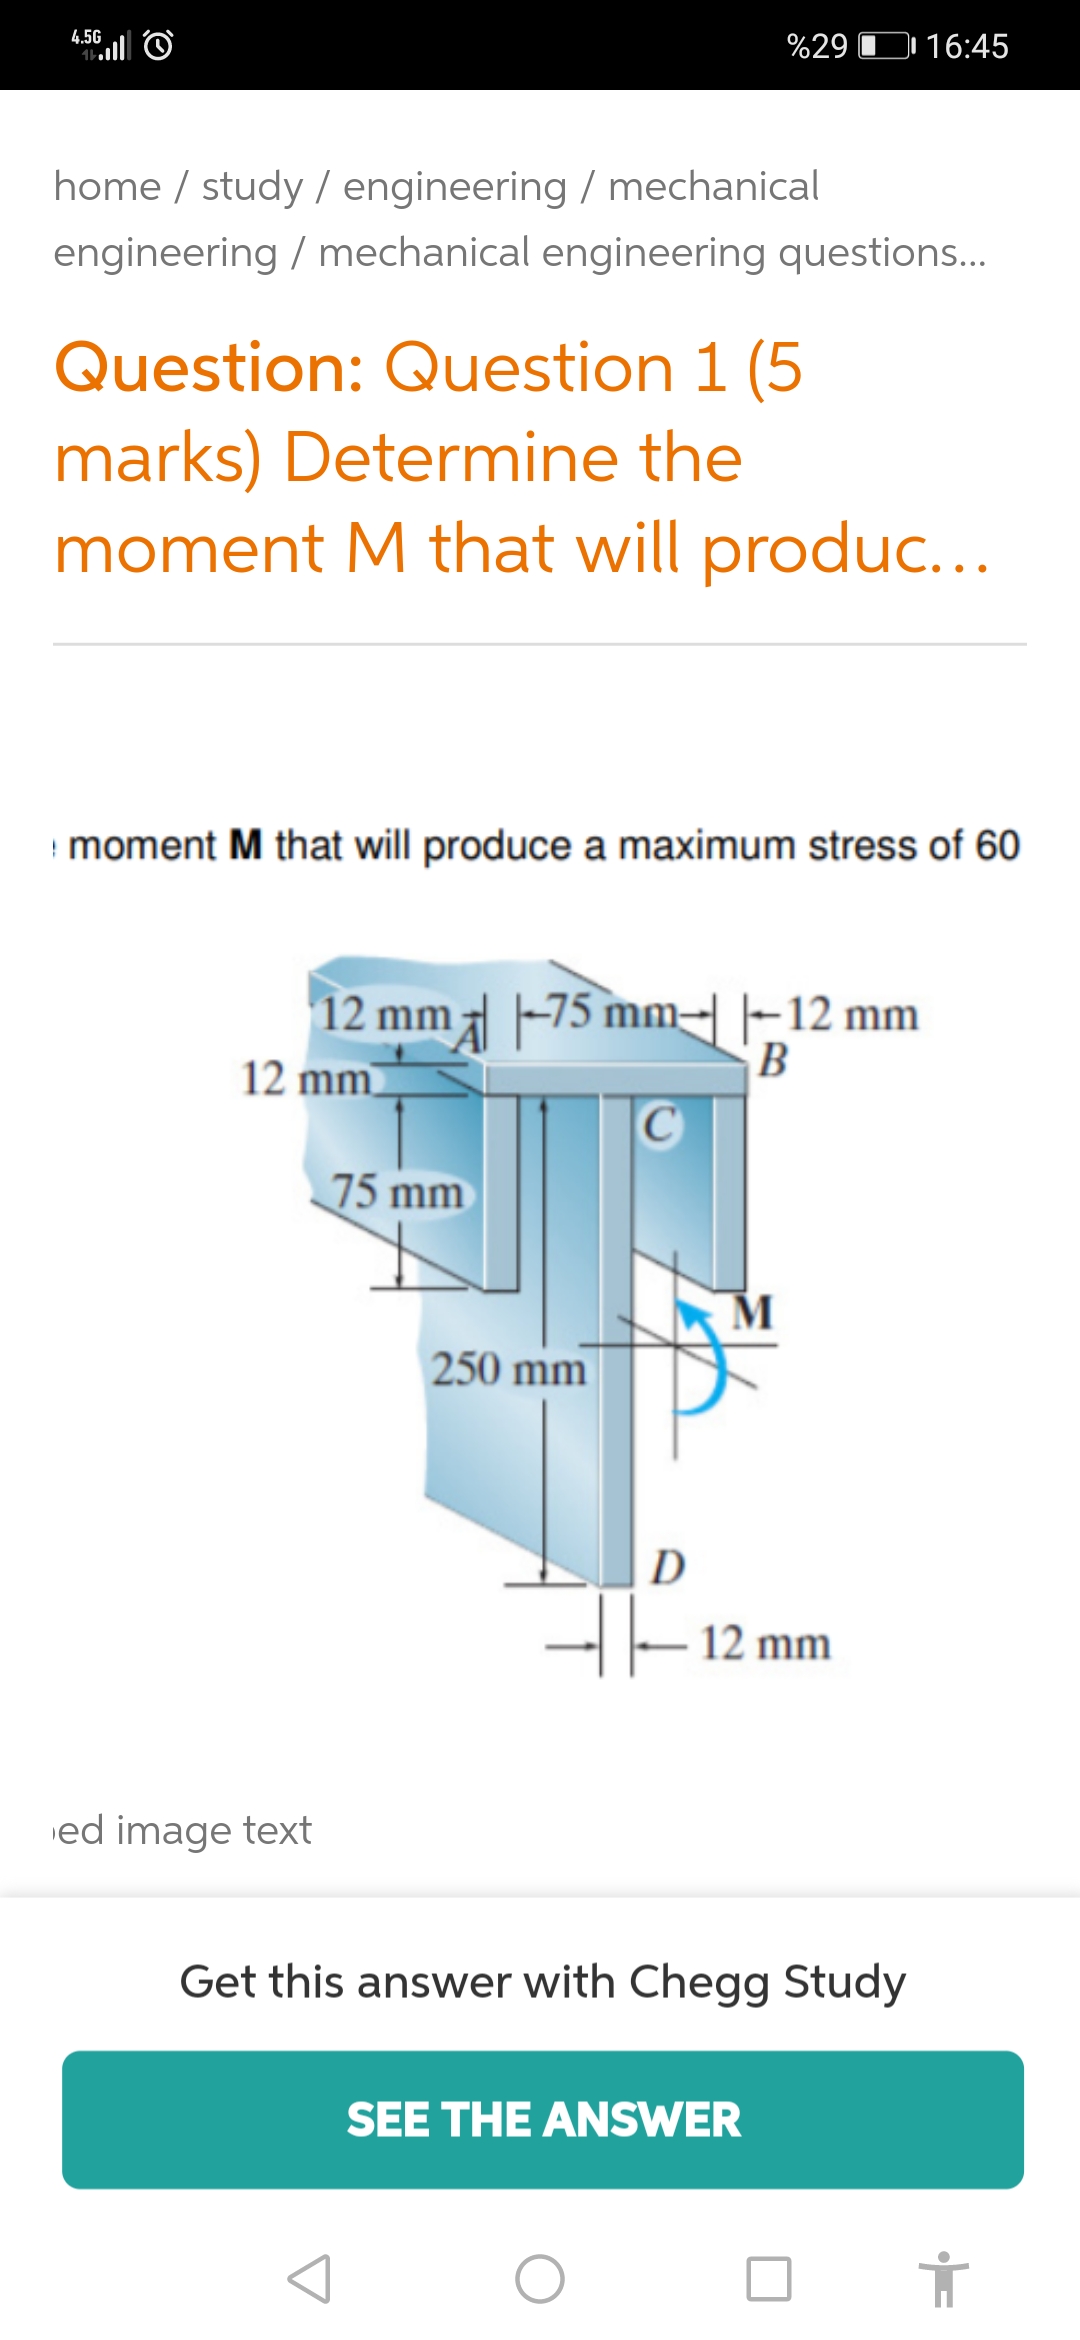 4.5G
%29 D 16:45
home / study / engineering / mechanical
engineering / mechanical engineering questions.
Question: Question 1 (5
marks) Determine the
moment M that will produc...
moment M that will produce a maximum stress of 60
12 mm -75 mm-|-12 mm
12 mm
B
75 mm
250 mm
D
-|- 12 mm
ed image text
Get this answer with Chegg Study
SEE THE ANSWER
